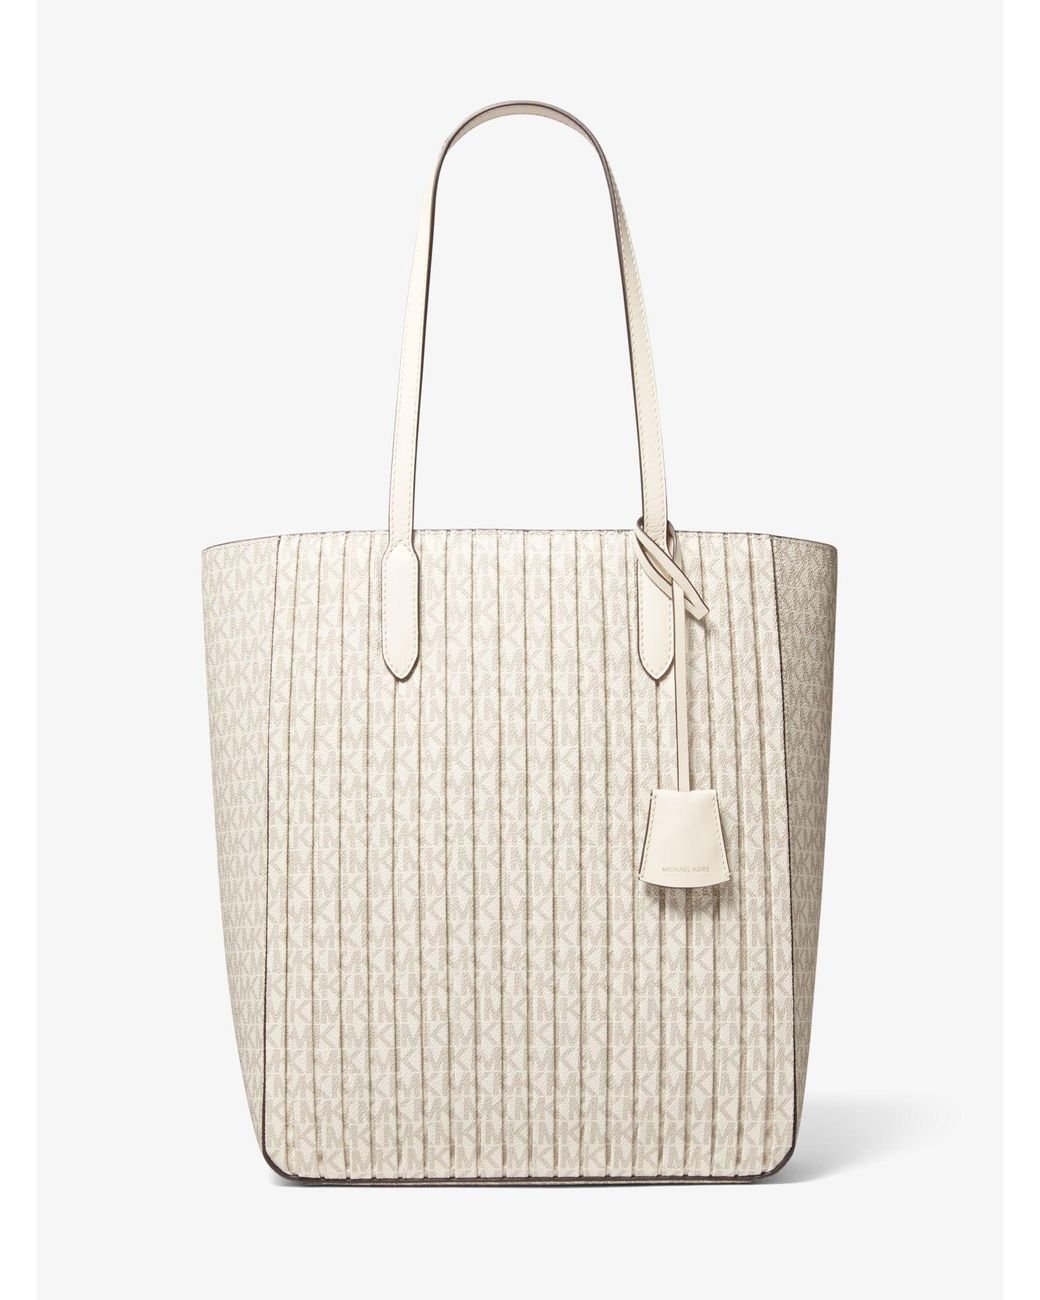 Michael Kors Sinclair Large Pleated Logo Tote Bag in Natural | Lyst